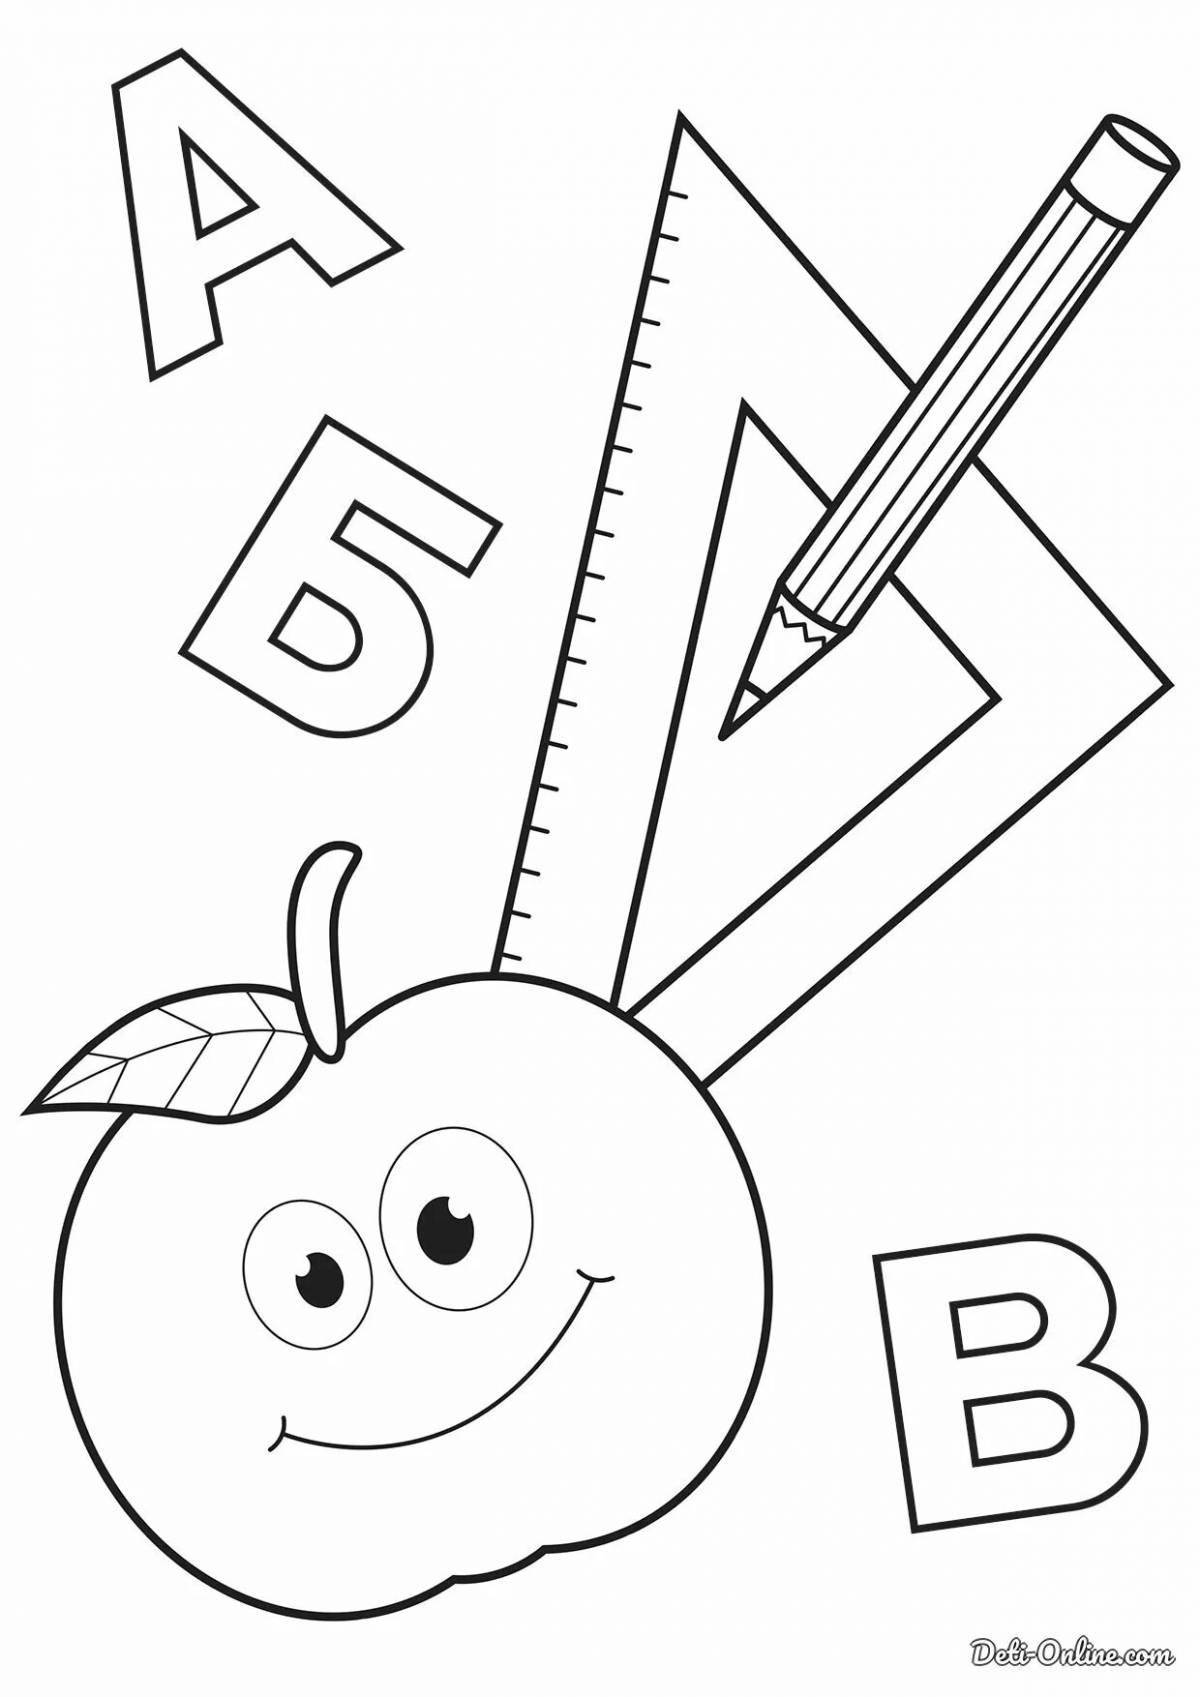 Coloring book for first graders